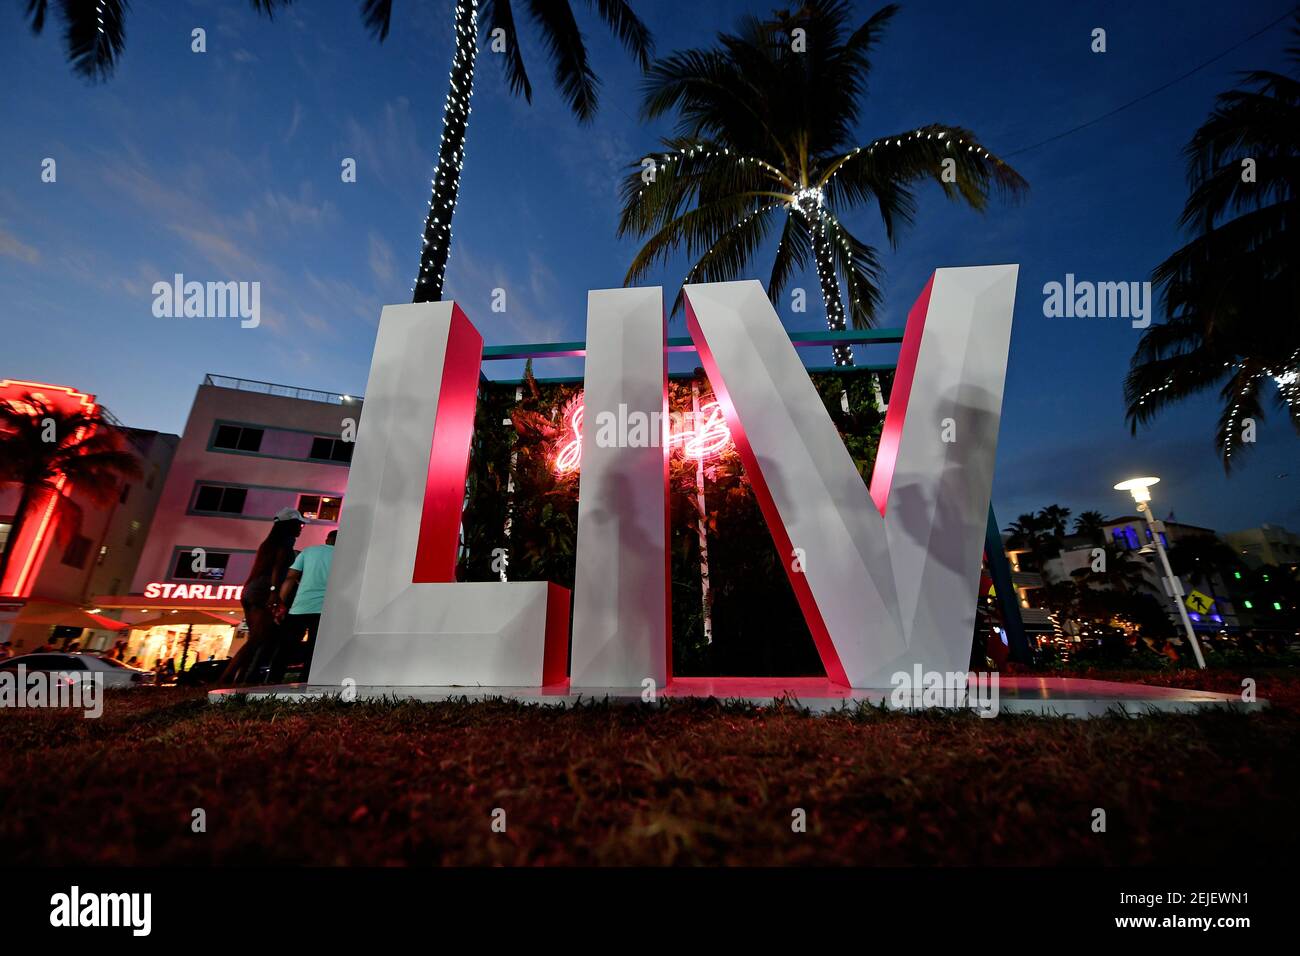 Jan 30, 2020; Miami, Florida, USA; A general view of the Super Bowl LIV logo off of Ocean Dr. in South Beach Miami prior to Super Bowl LIV between the San Francisco 49ers at Kansas City Chiefs. Mandatory Credit: Jasen Vinlove-USA TODAY Sports/Sipa USA Stock Photo